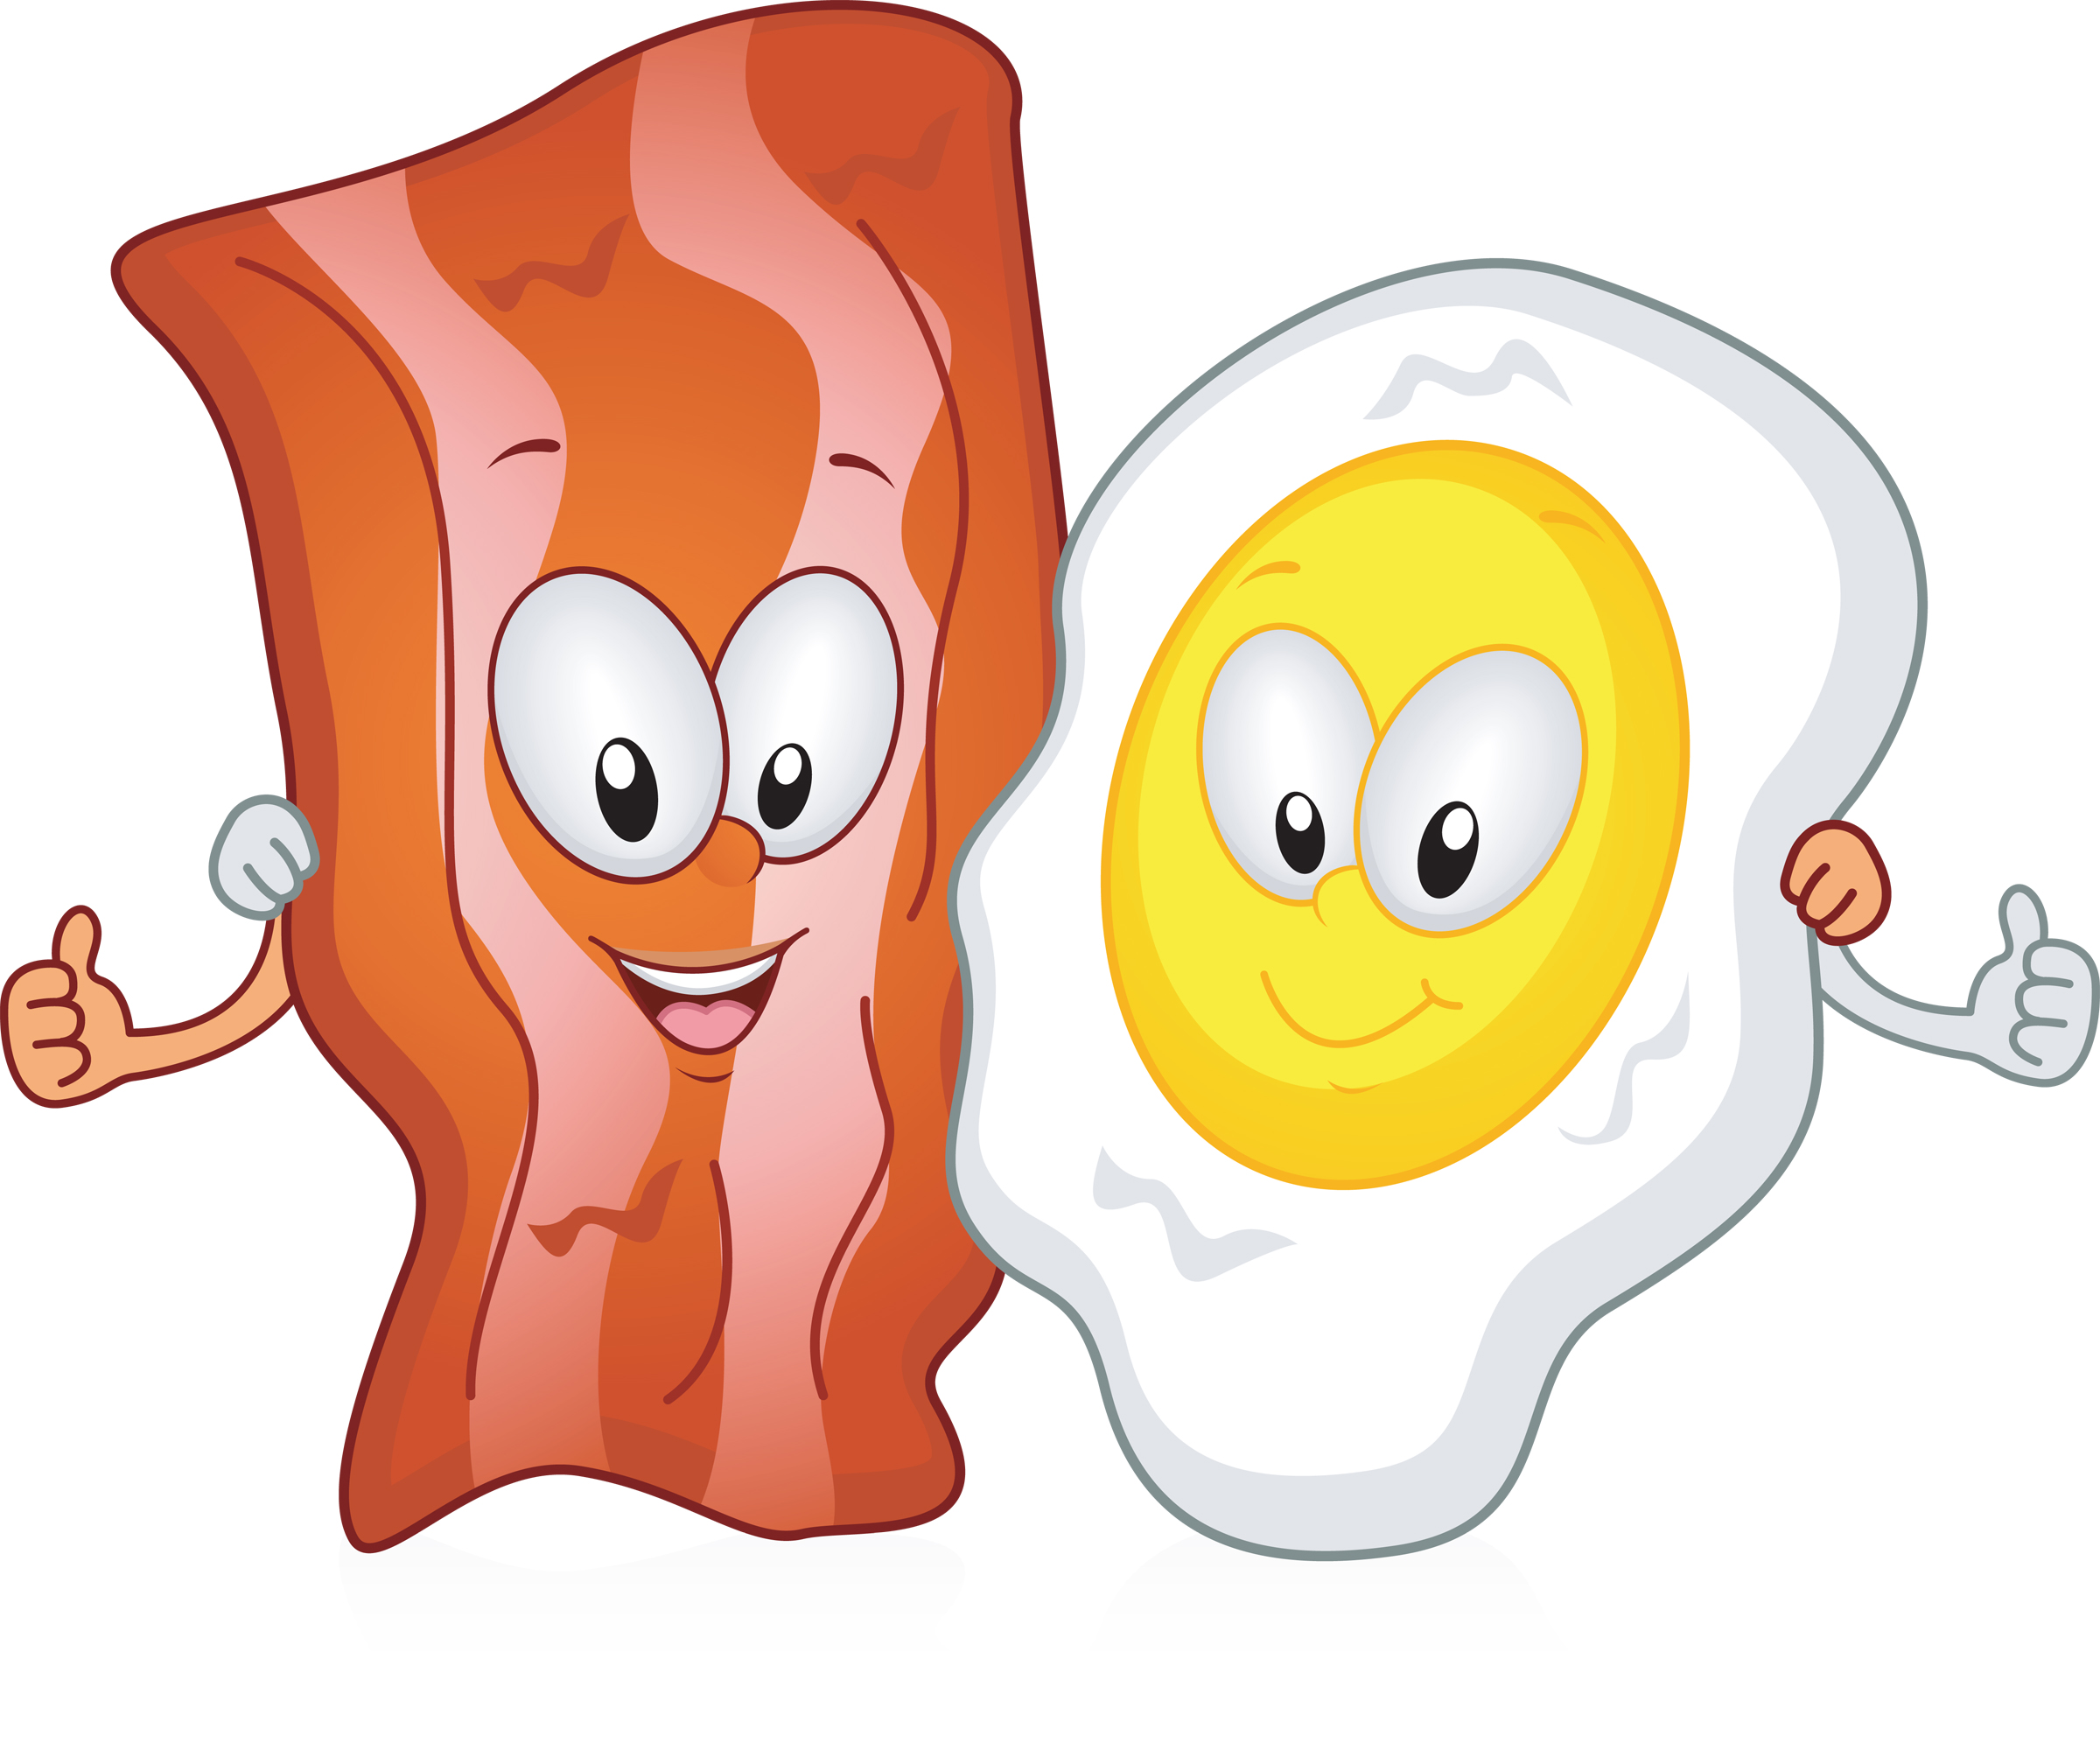 Bacon and eggs.